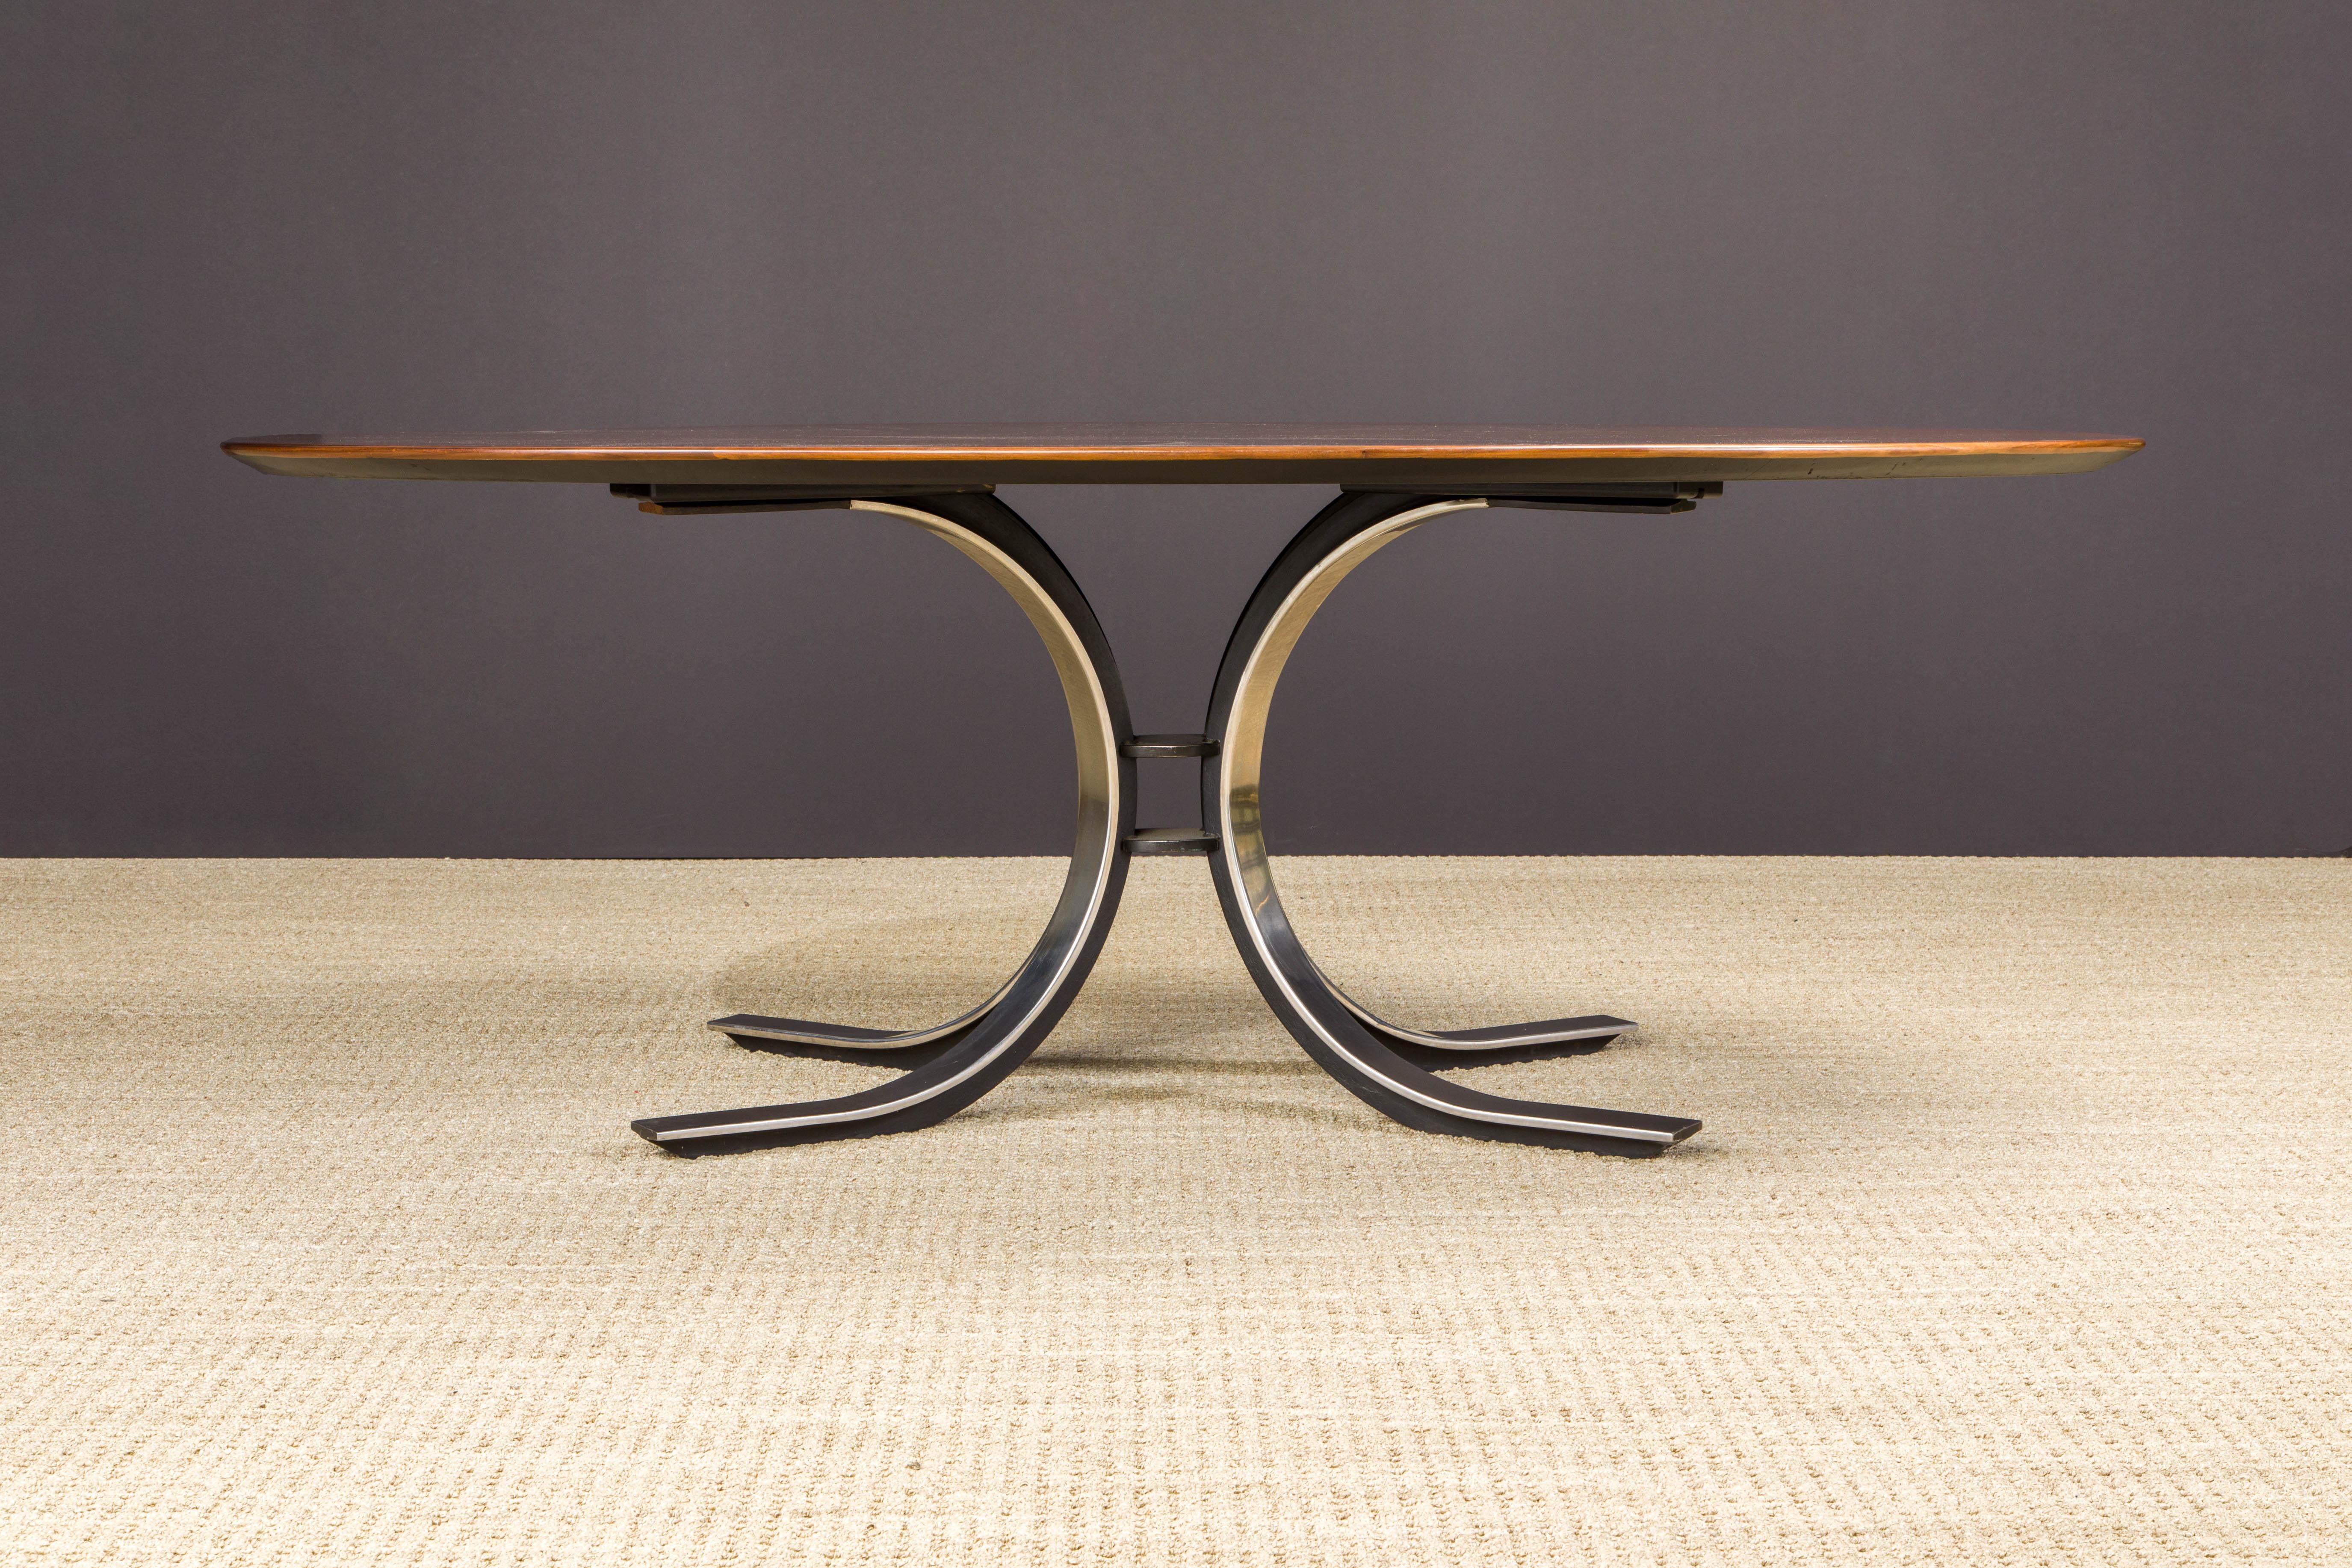 This beautiful dining table by Osvaldo Borsani for Stow Davis, circa 1970, features a beautifully refinished oval top in starburst walnut over a heavy contrasting polished and black enameled steel tulip base. The top was refinished in a French